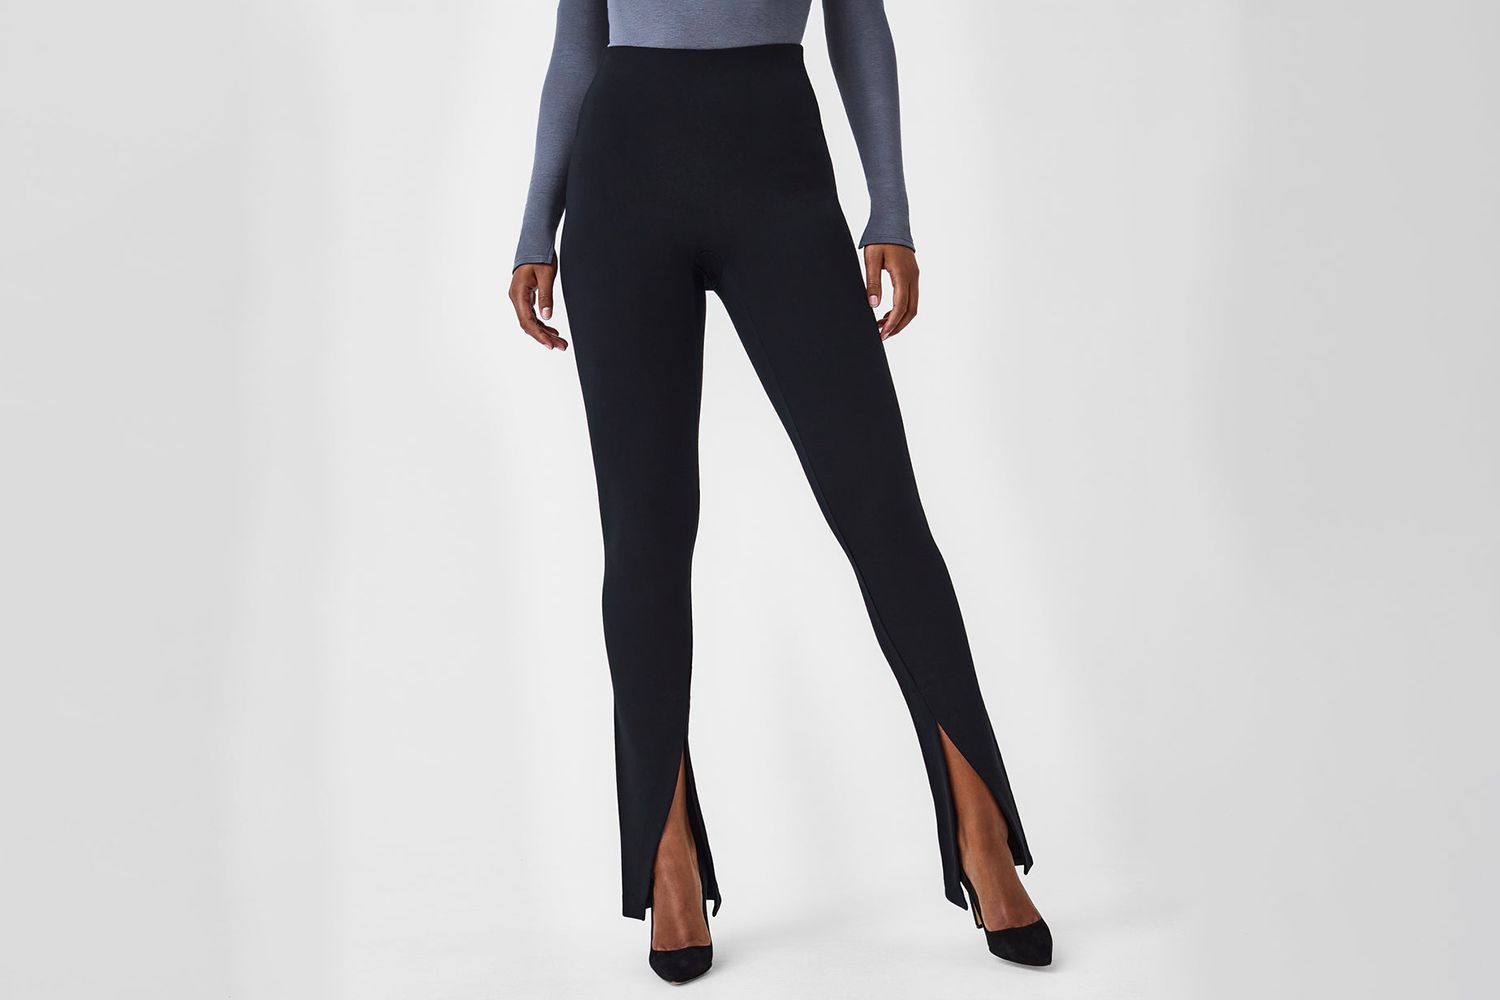 The Perfect Front Slit Legging